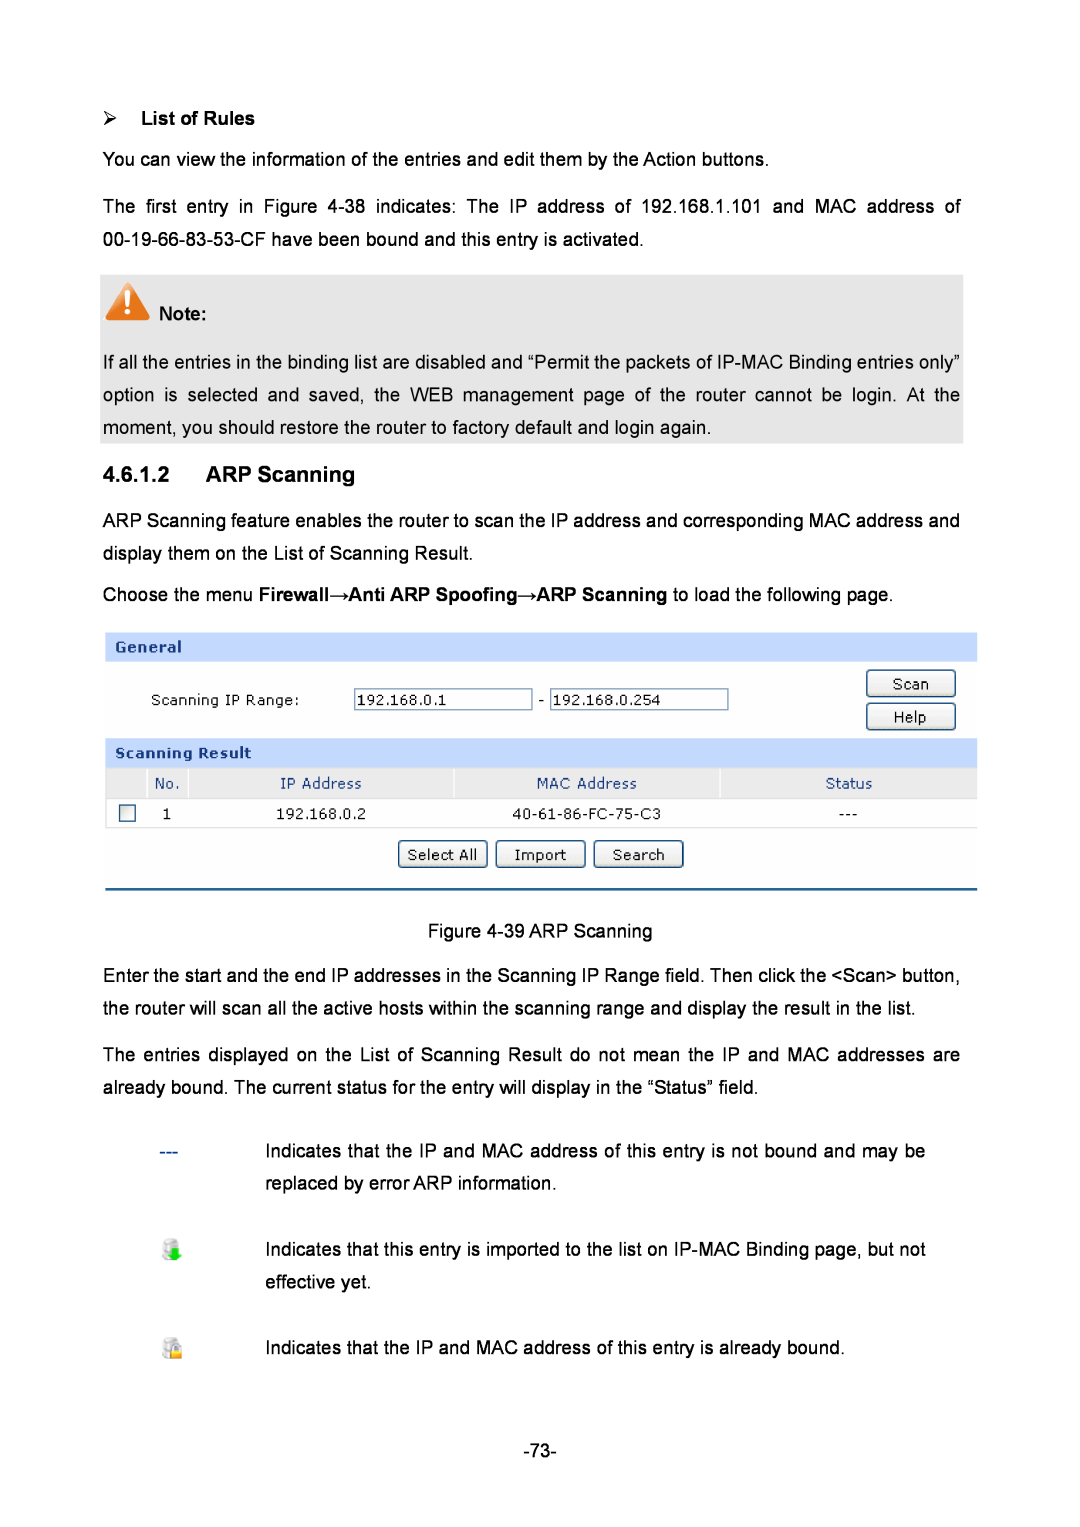 TP-Link 1910010933 manual ARP Scanning, ¾ List of Rules 